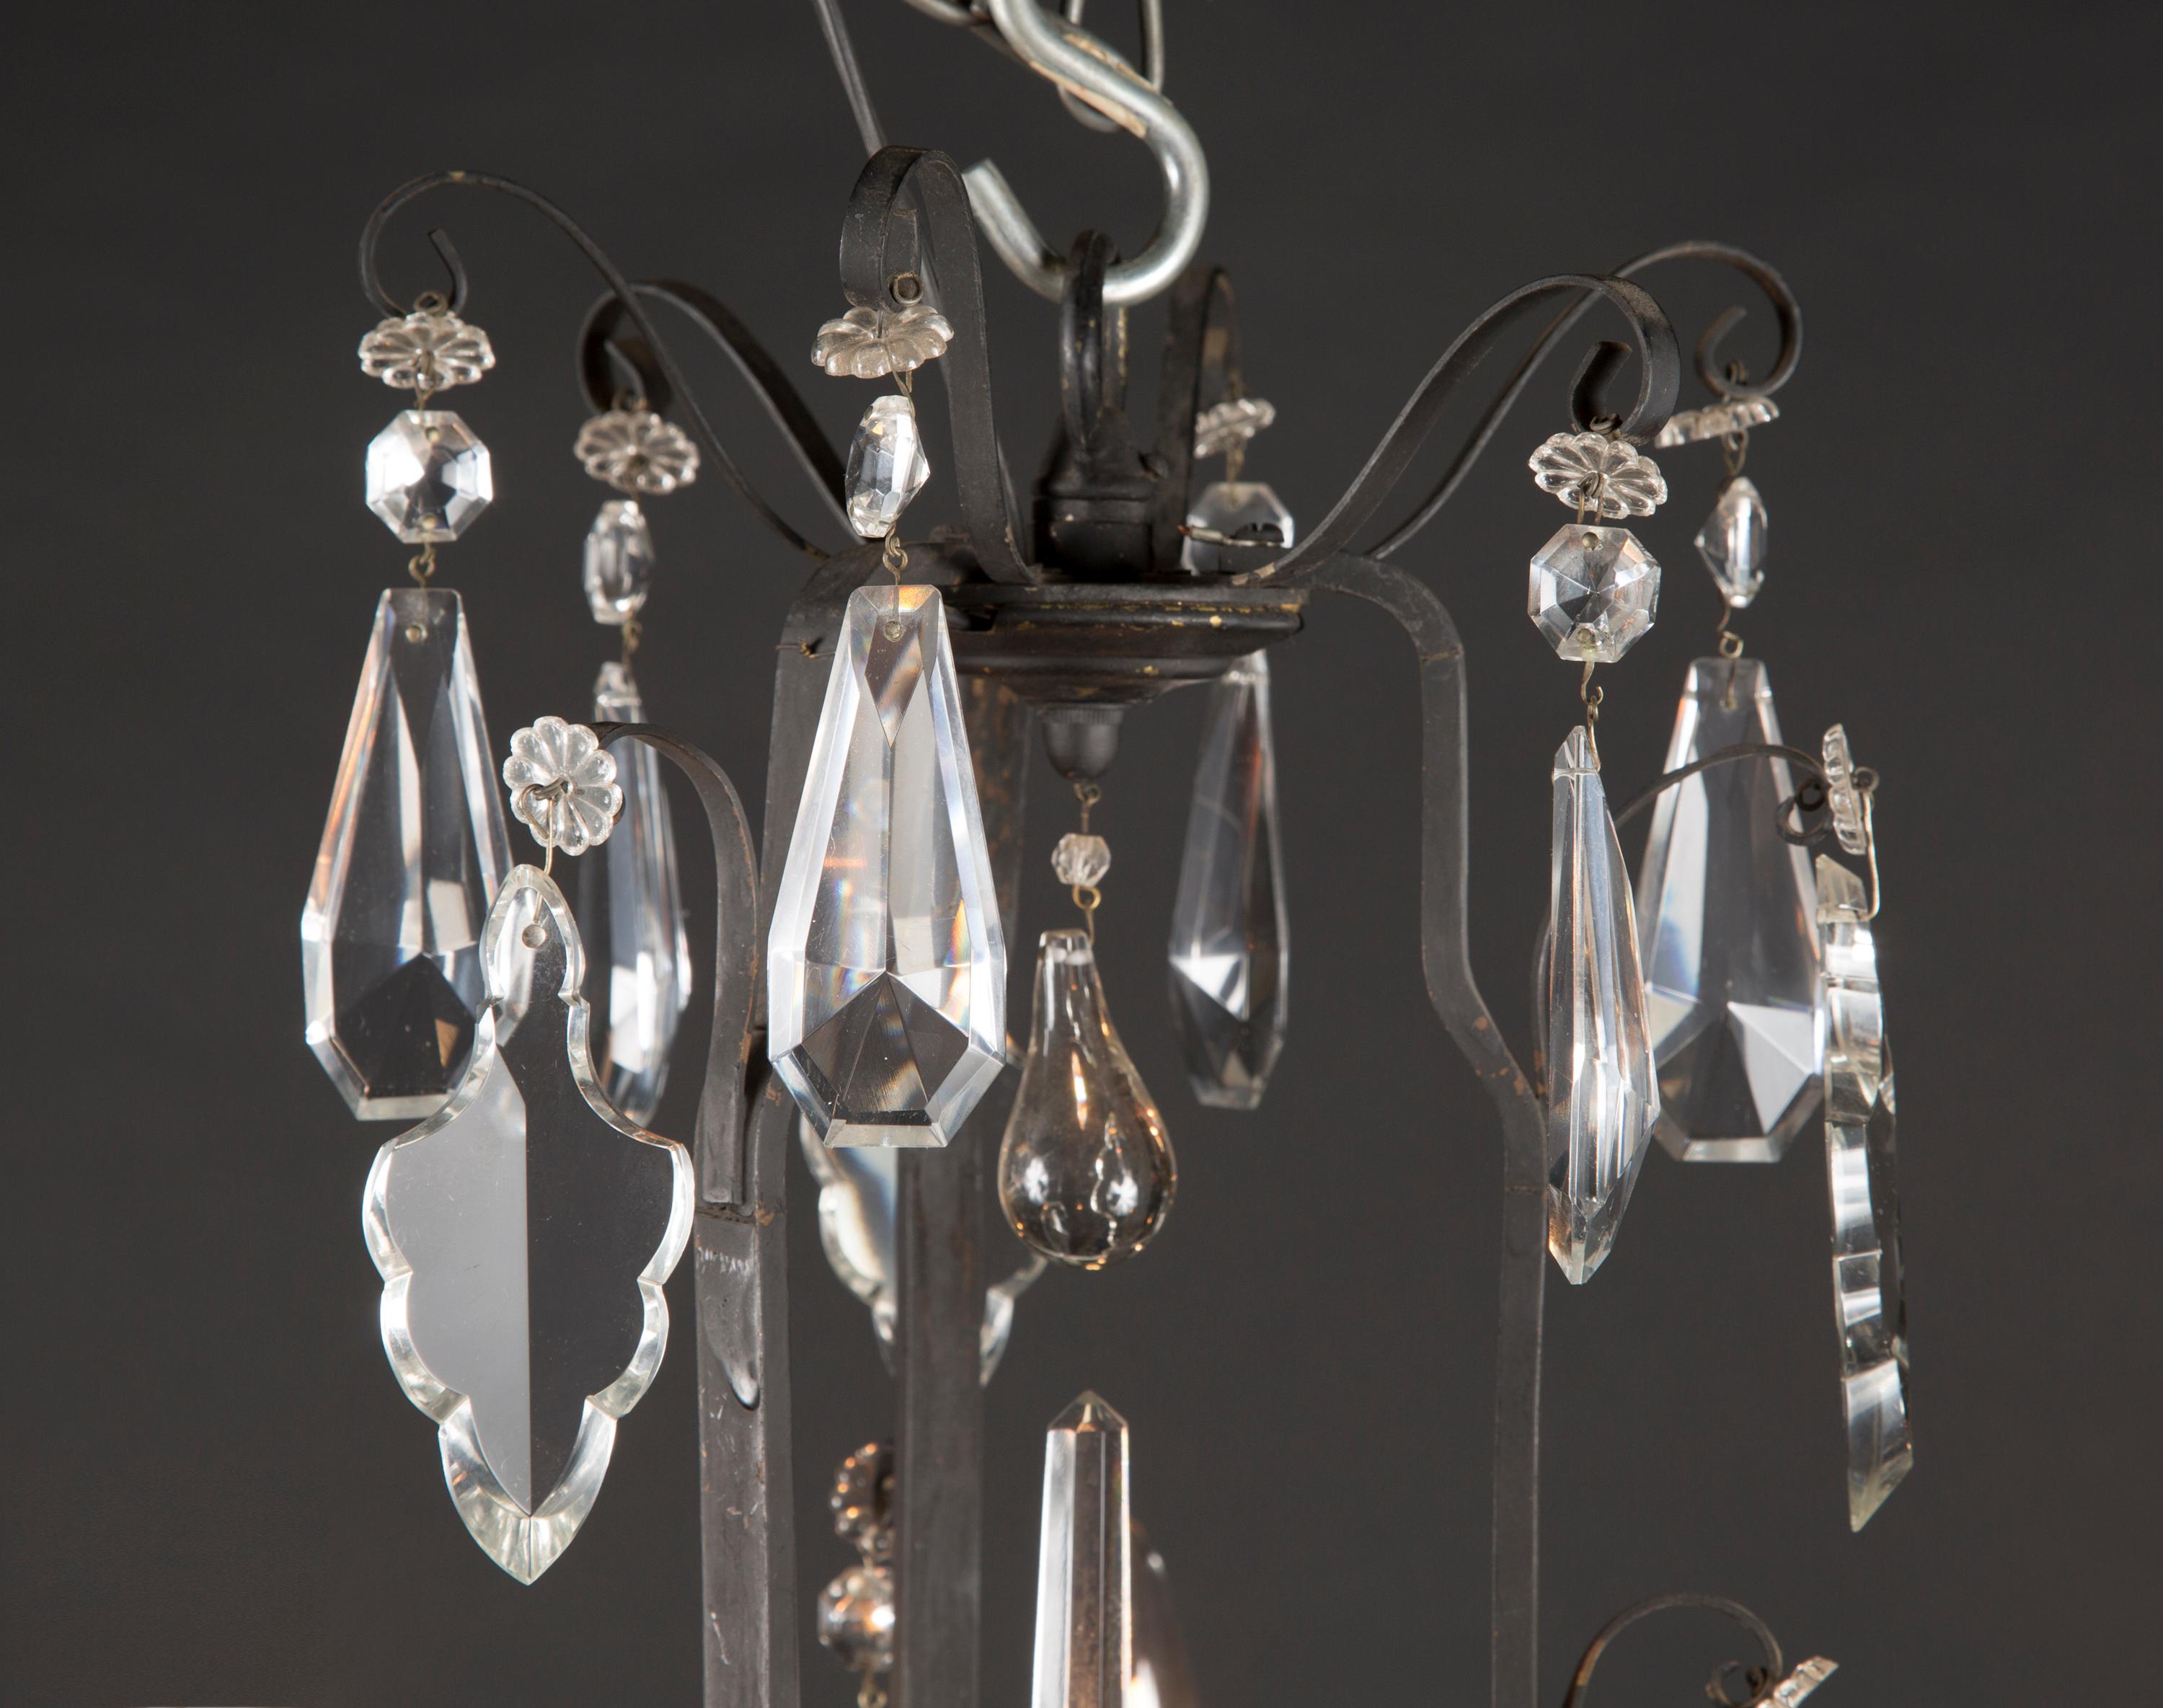 This classic early 20th century bronze chandelier comes from France and is draped in a variety of beautifully cut crystal plaquettes. Note the crystal fleurettes at top and center, the teardrop and geometric crystal interspersed throughout, and the